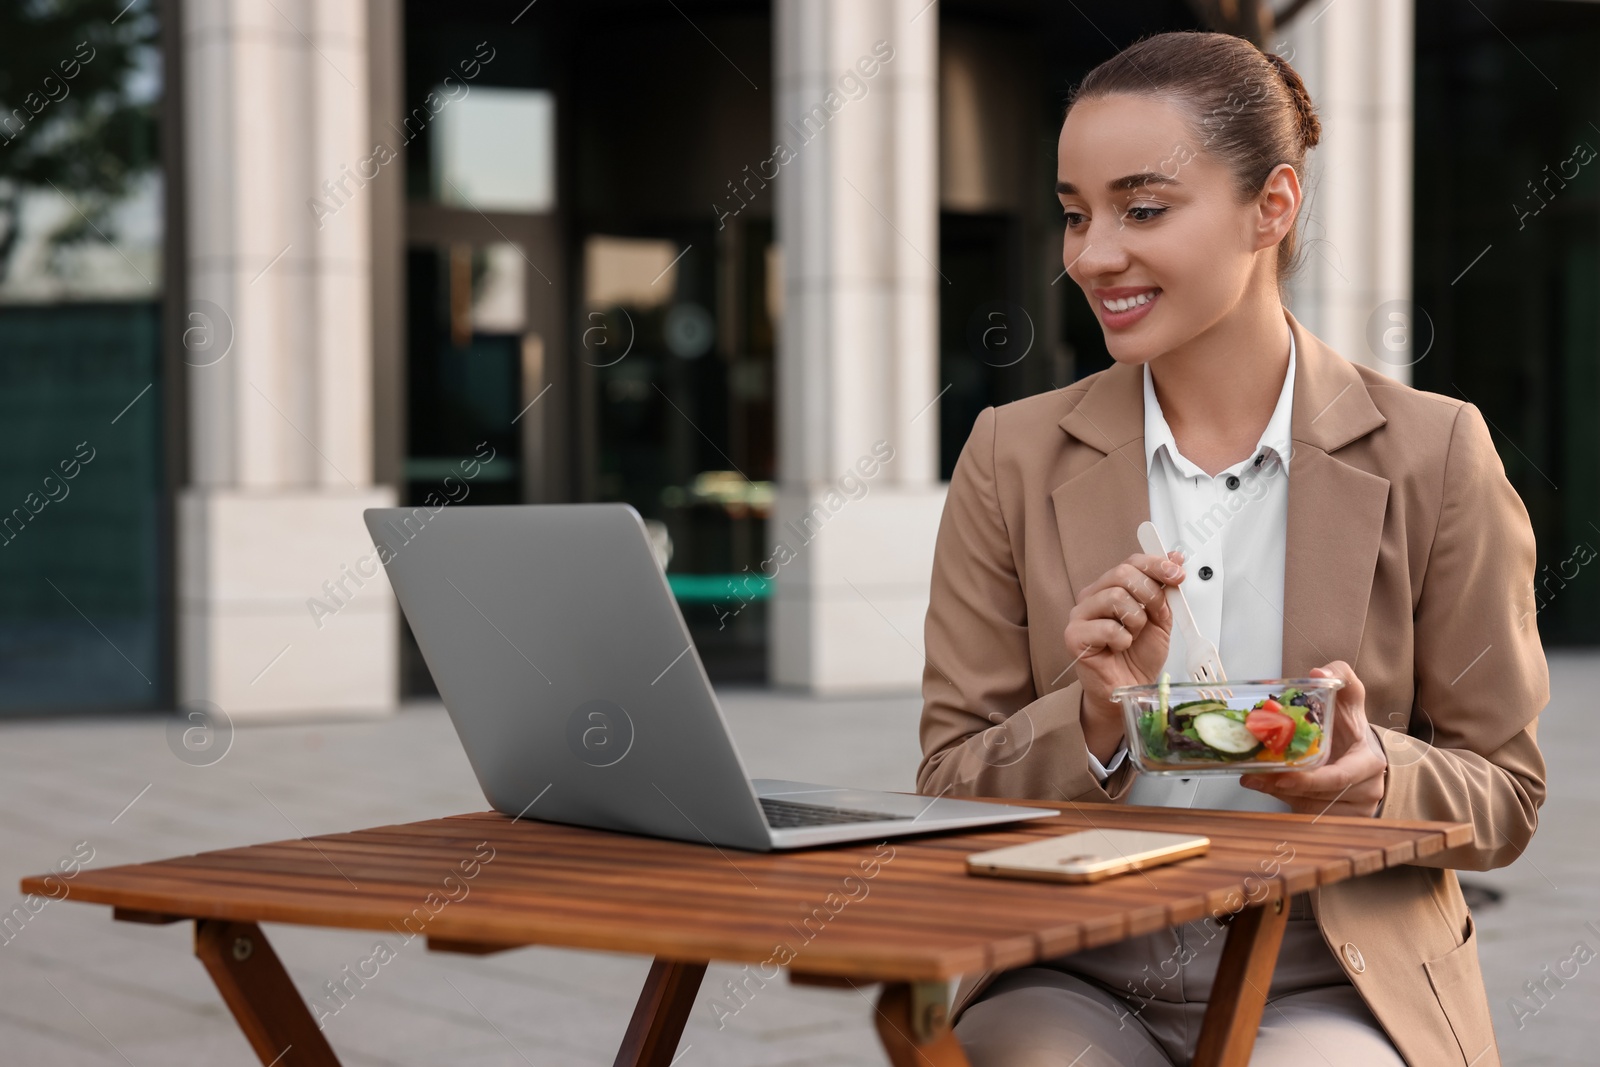 Photo of Happy businesswoman using laptop during lunch at wooden table outdoors